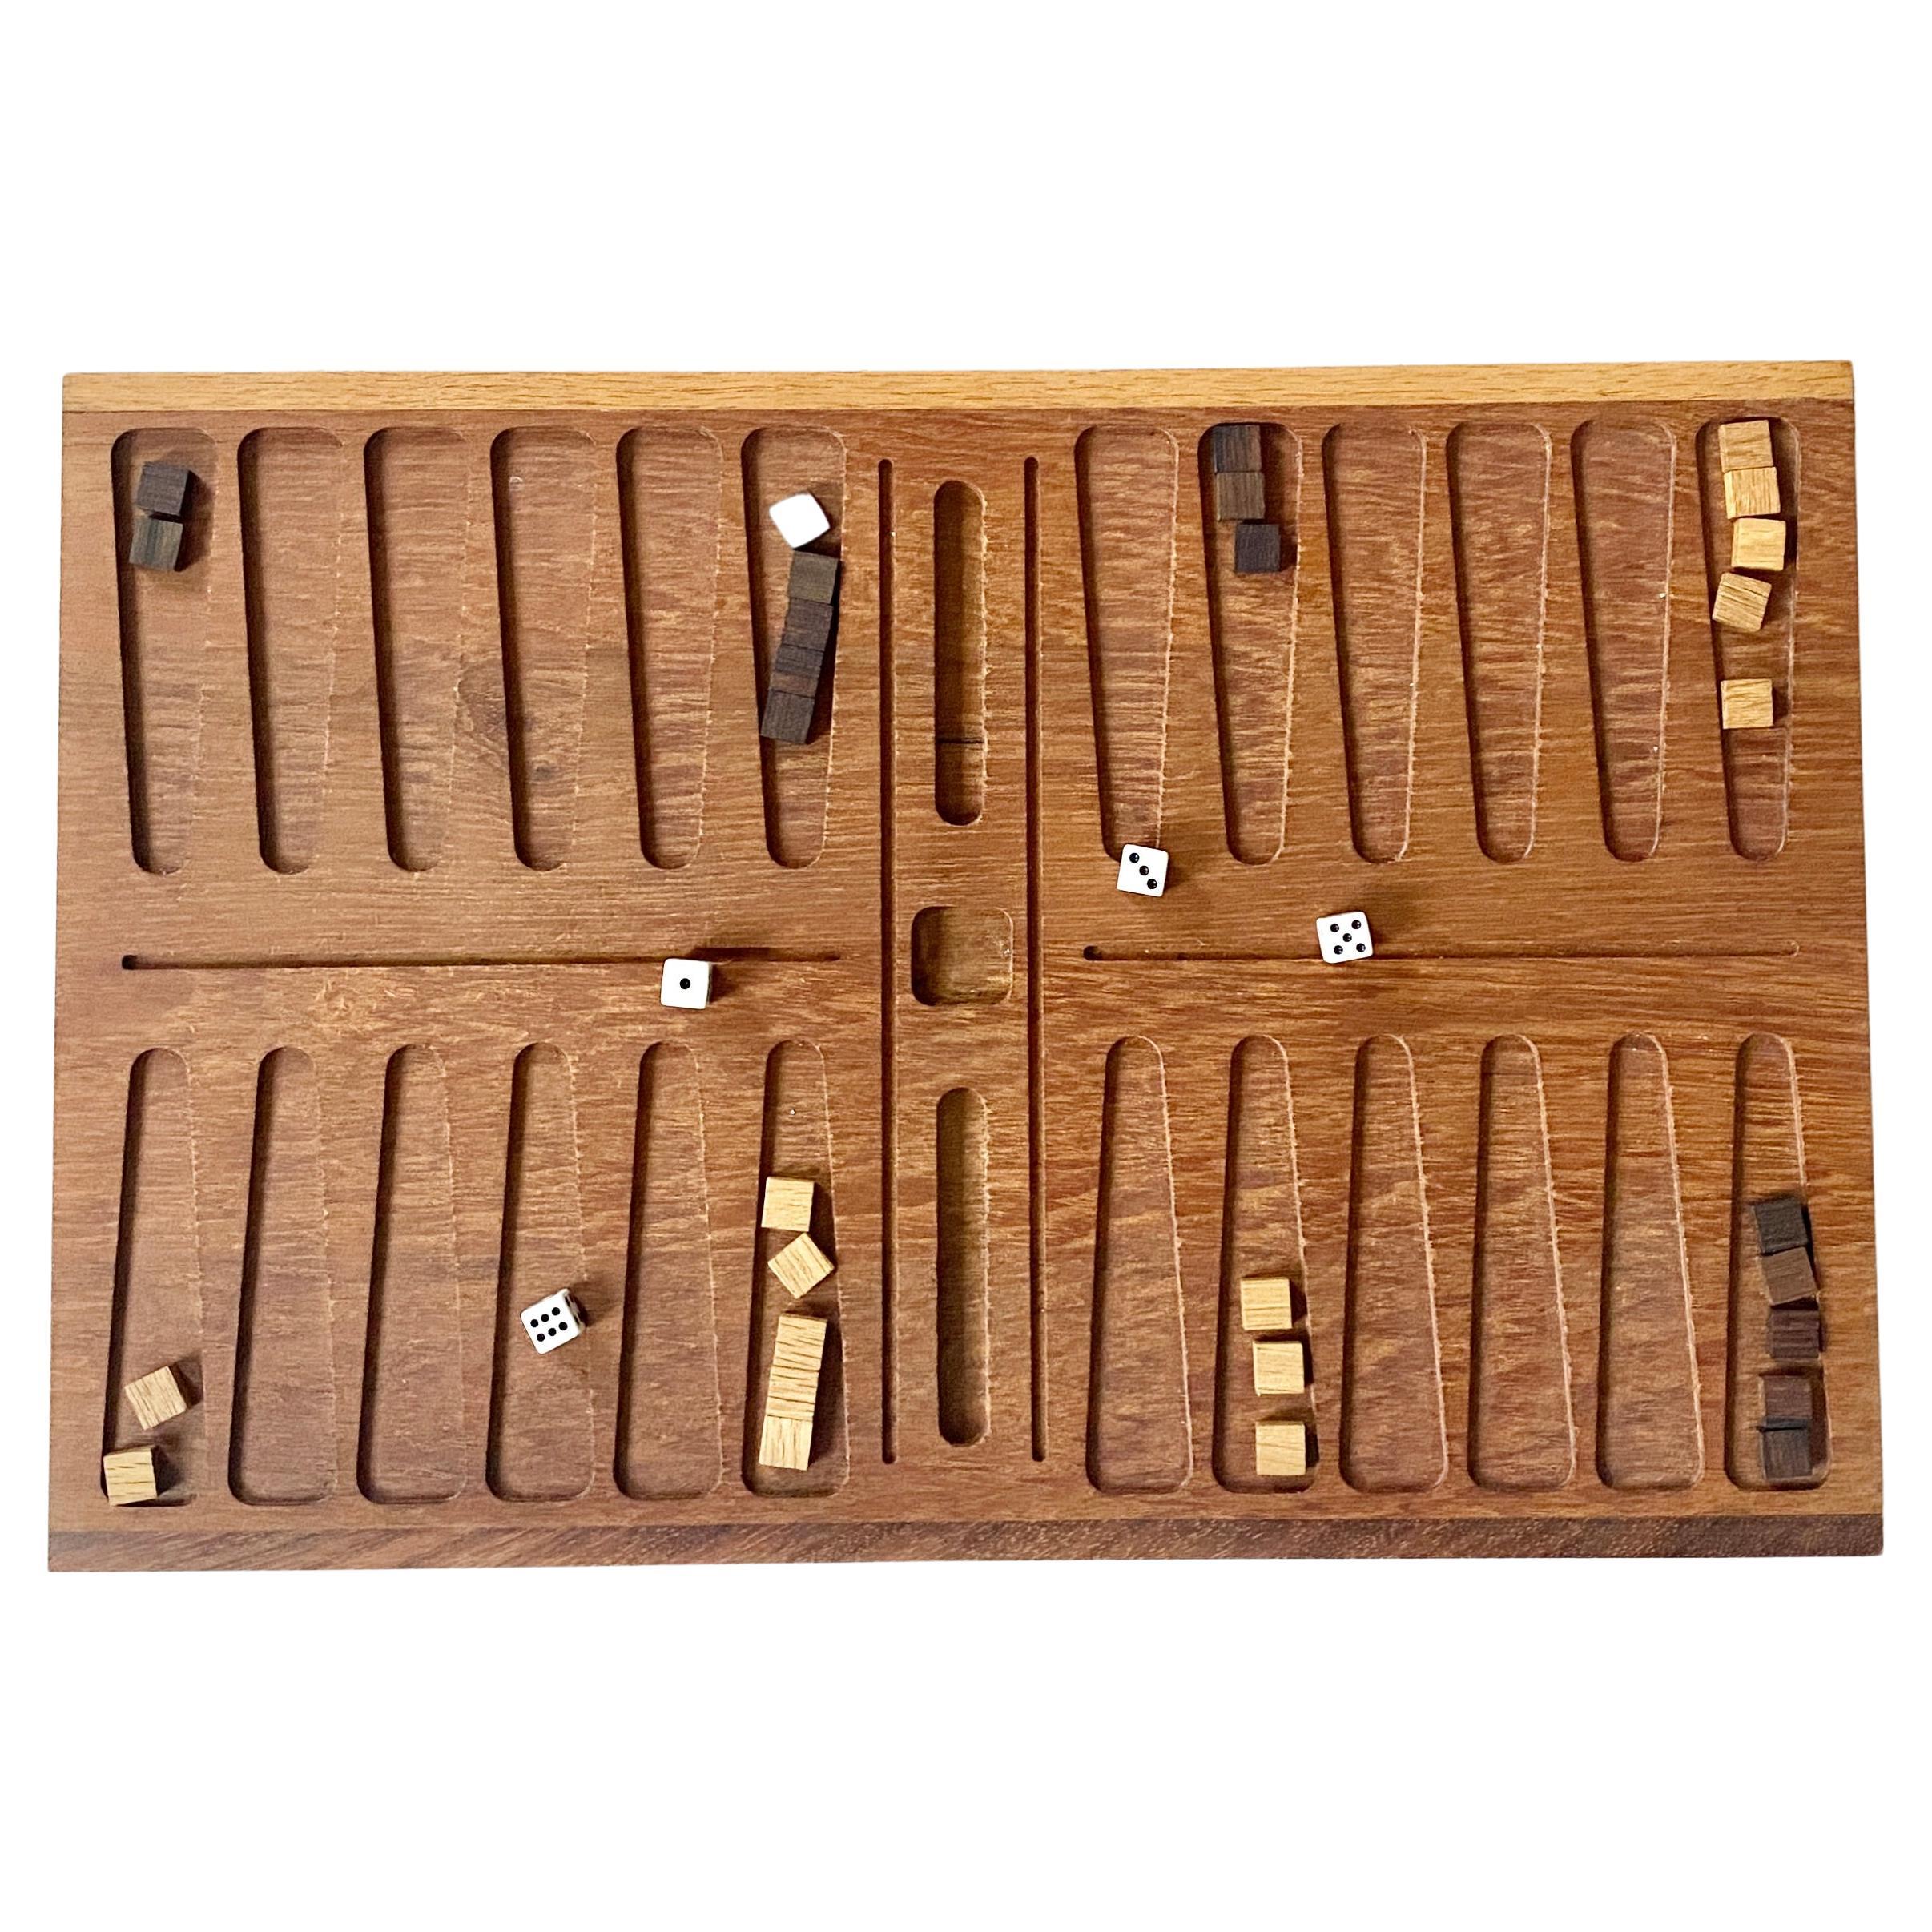 Vintage Backgammon set by Henning Bang made in Denmark. 

The Backgammon set is a solid teak board with 30 playing pieces. The set comes in its original box, with the original four dices and the original leaflet with the rules are